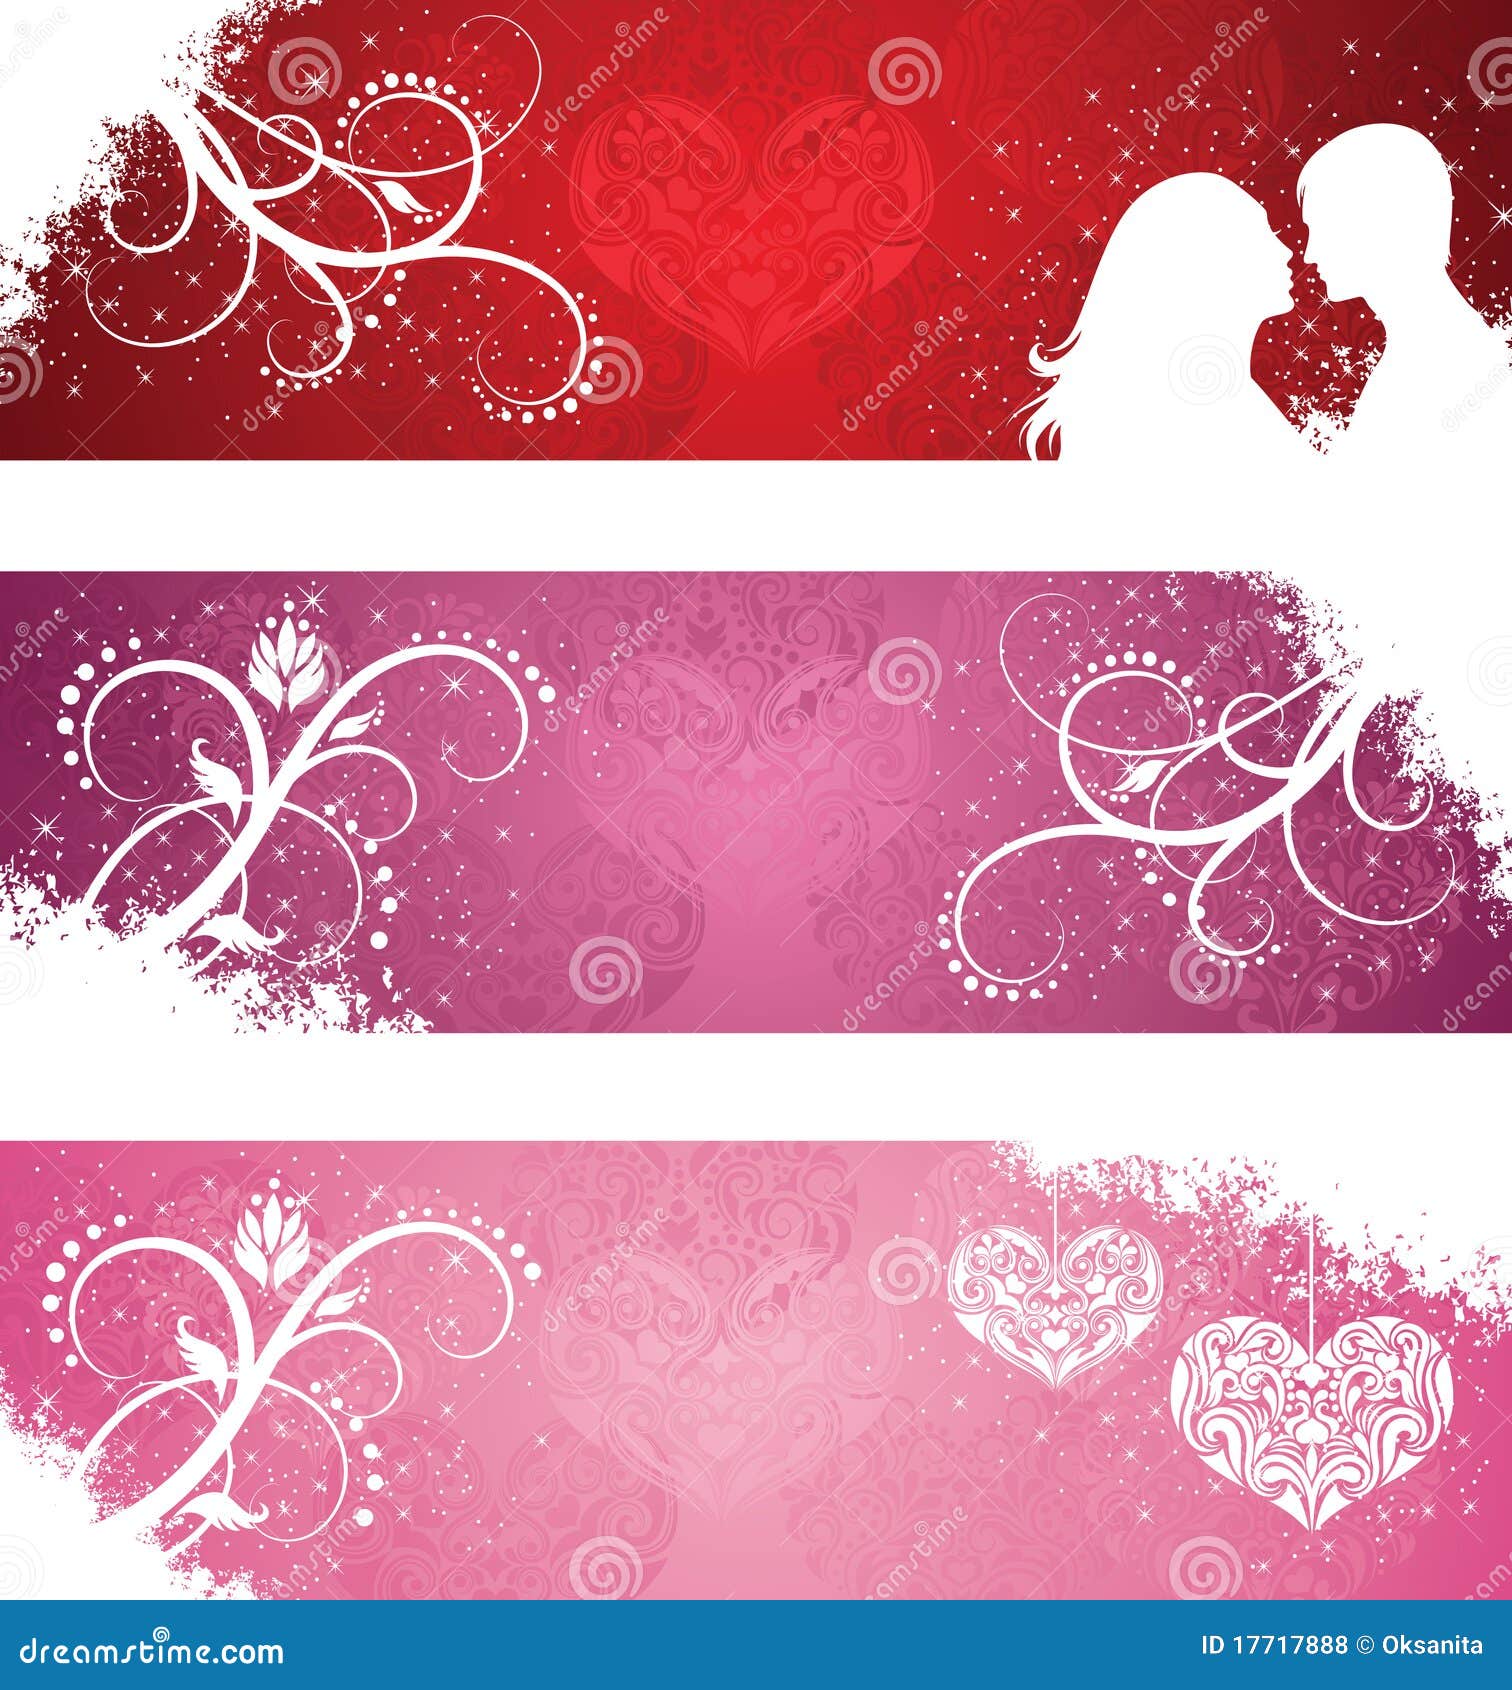 Valentine's day banners. stock vector. Illustration of ...